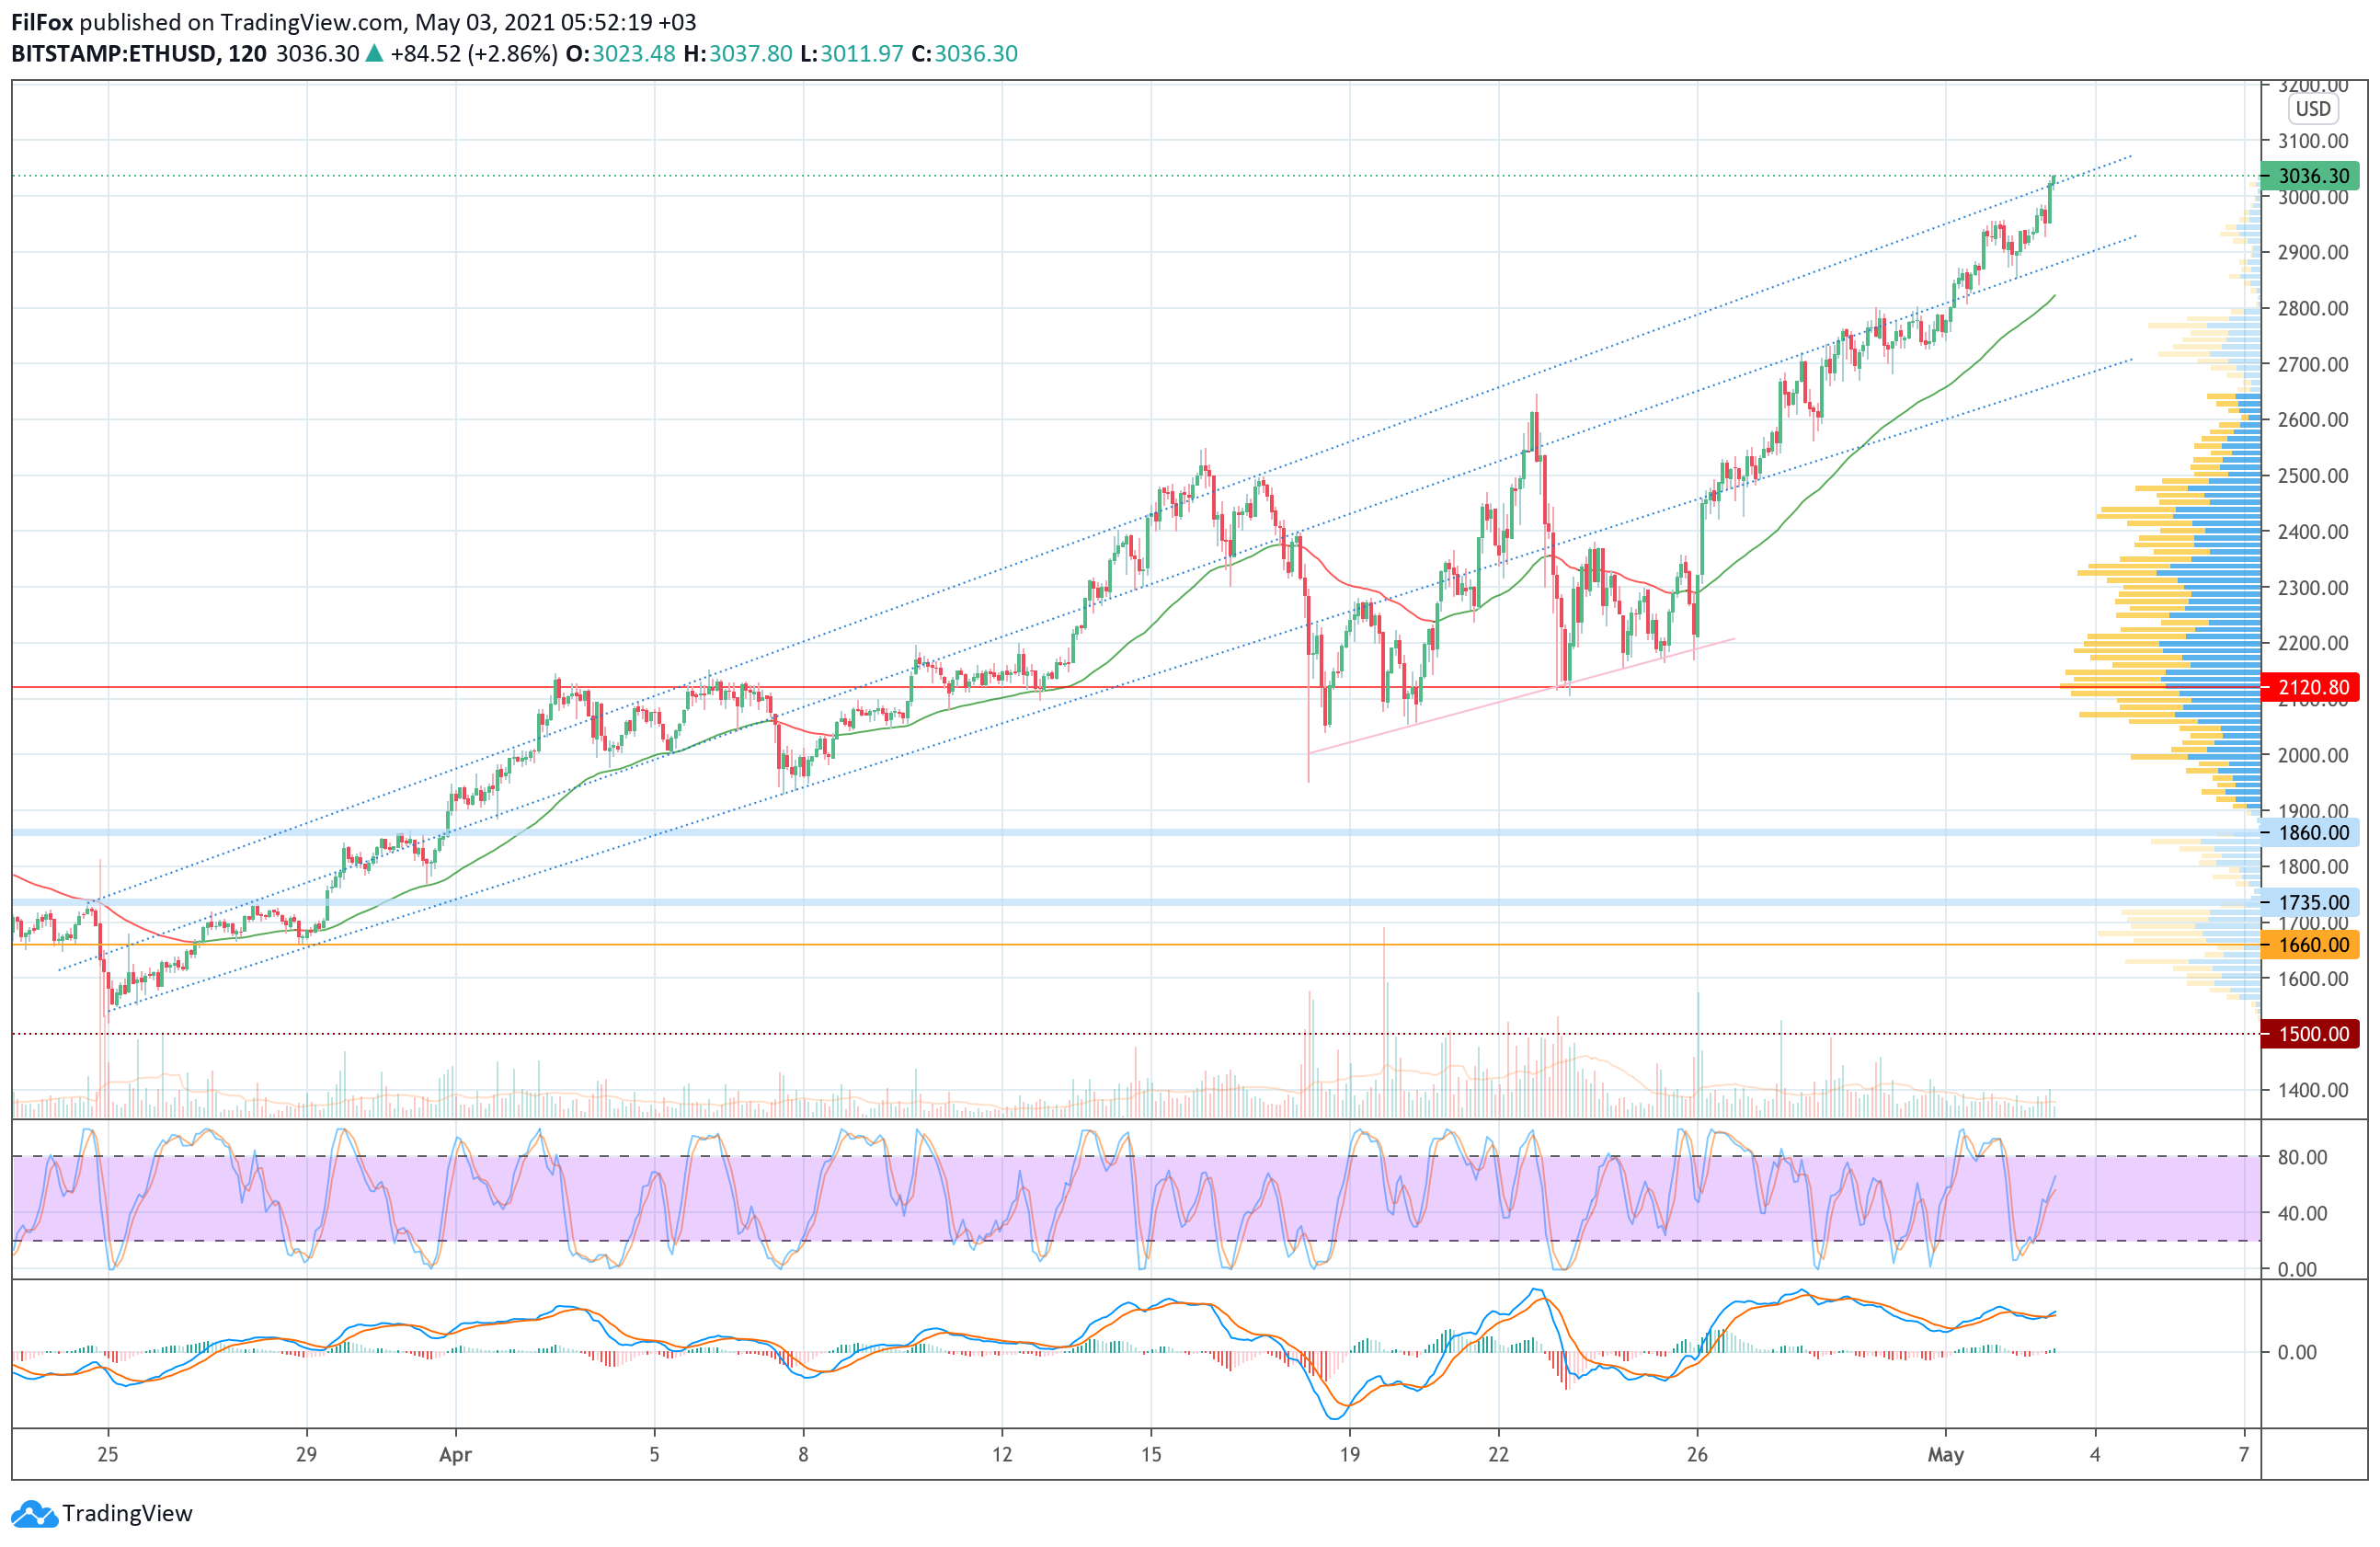 Analysis of the prices of Bitcoin, Ethereum, XRP for 03/05/2021